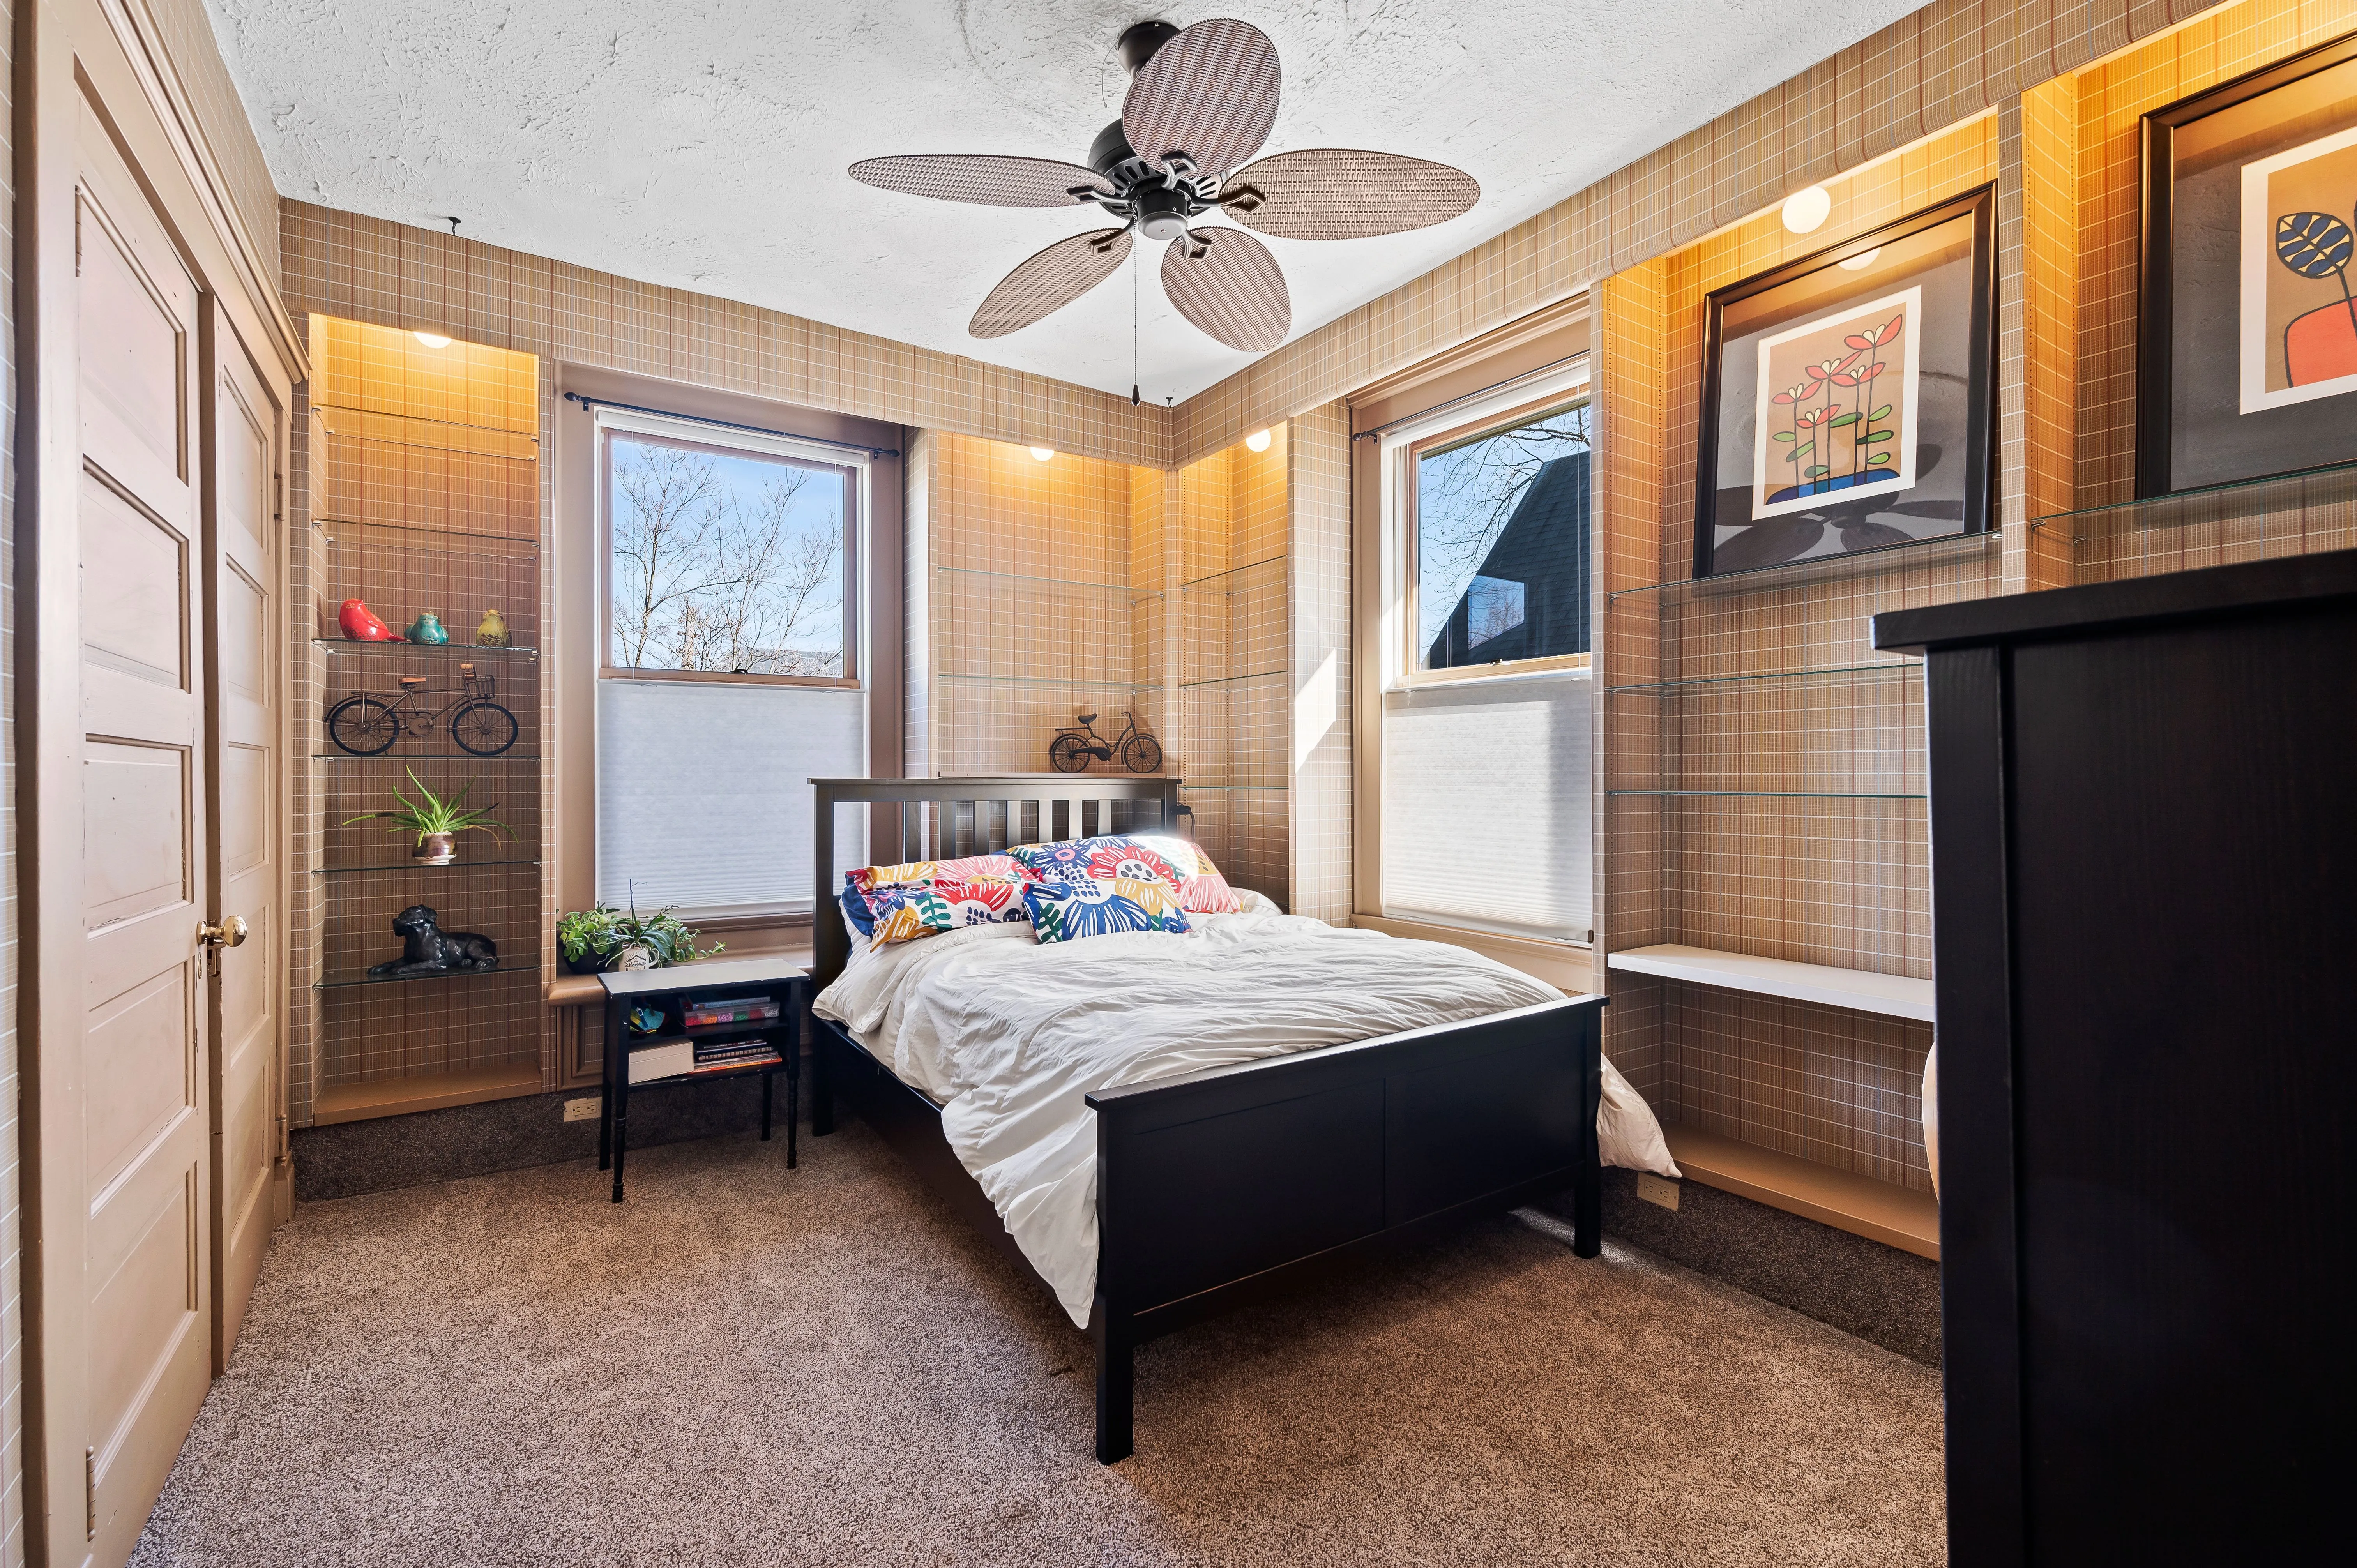 Cozy bedroom with a double bed, side table, ceiling fan, and framed pictures on wood-paneled walls, featuring a carpeted floor and multiple windows.